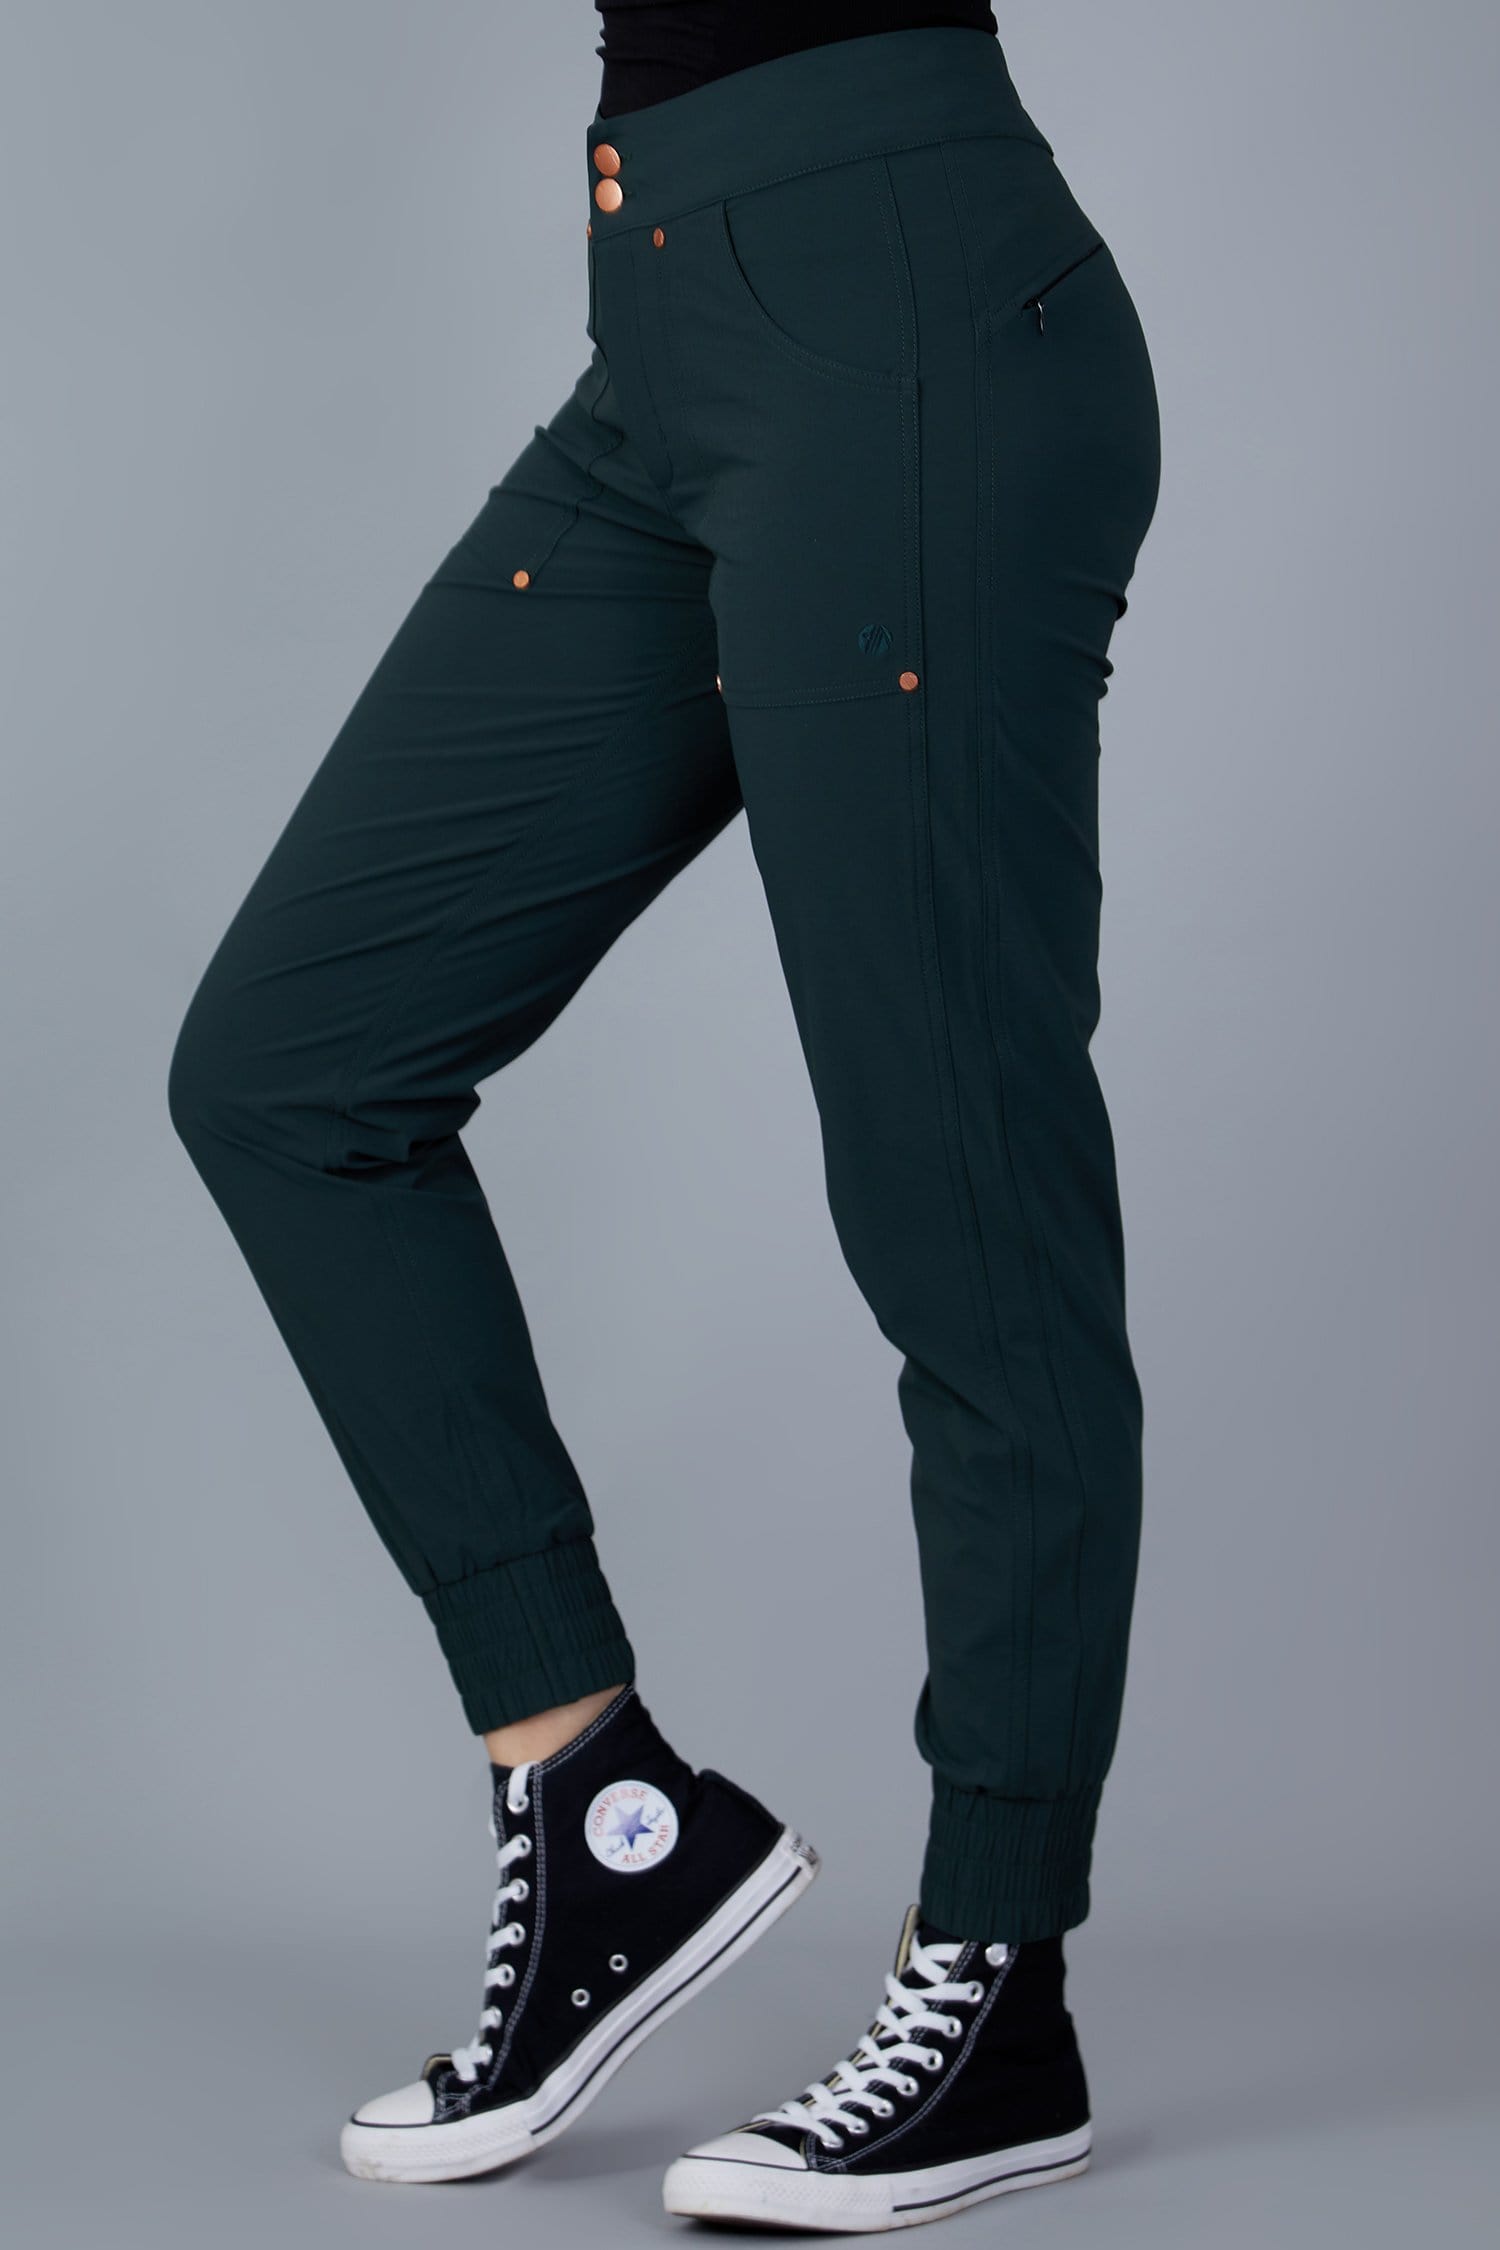 Casual Stroll Pants - Forest Green - 34r / Uk16 - Womens - Acai Outdoorwear